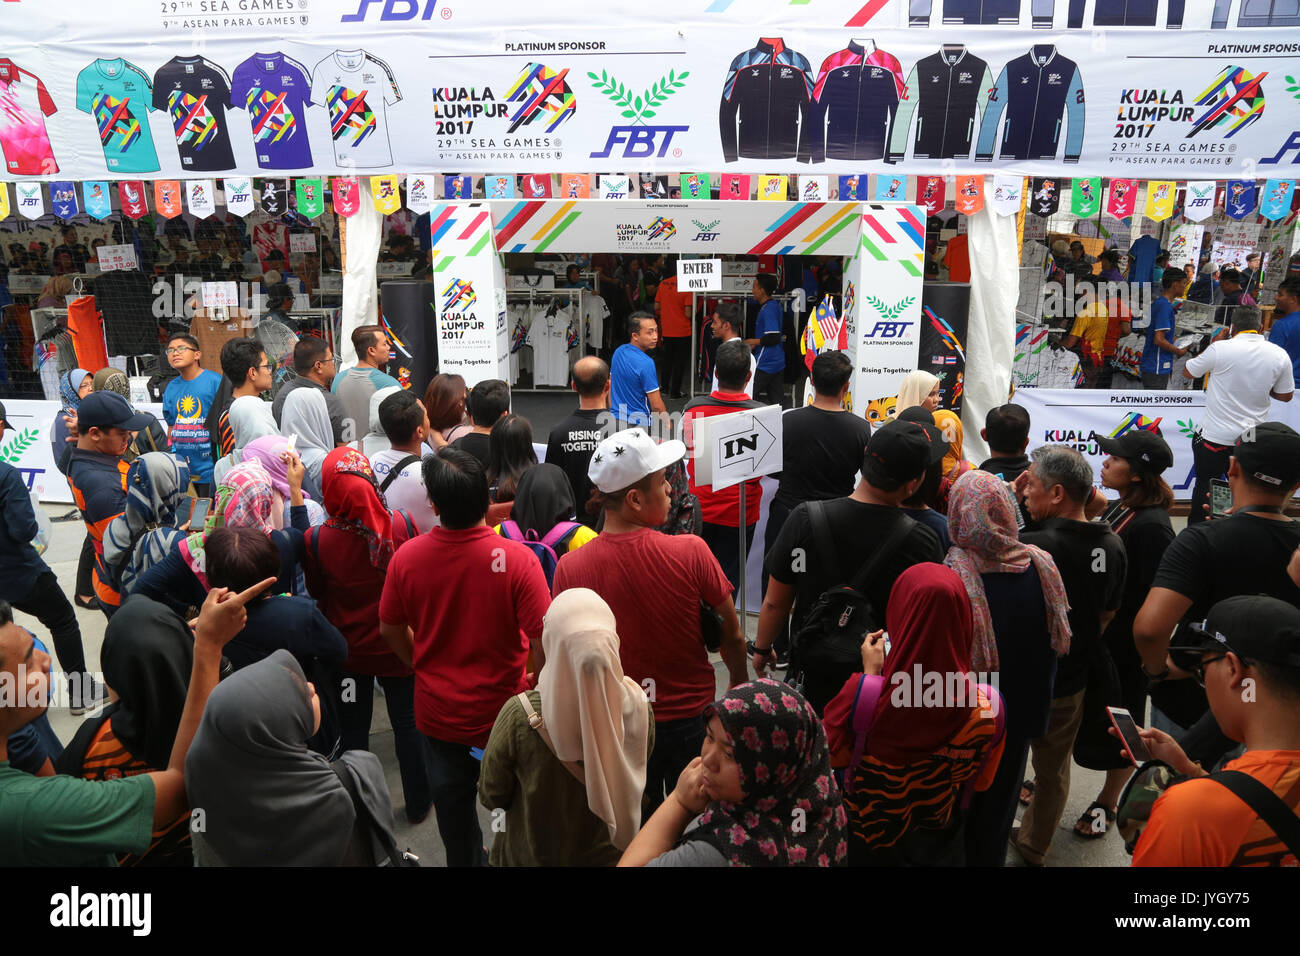 Crowd waiting to buy the 29th SEA games official merchandises such as T-shirt, souvenir etc. Credit: Calvin Chan/Alamy Live News Stock Photo